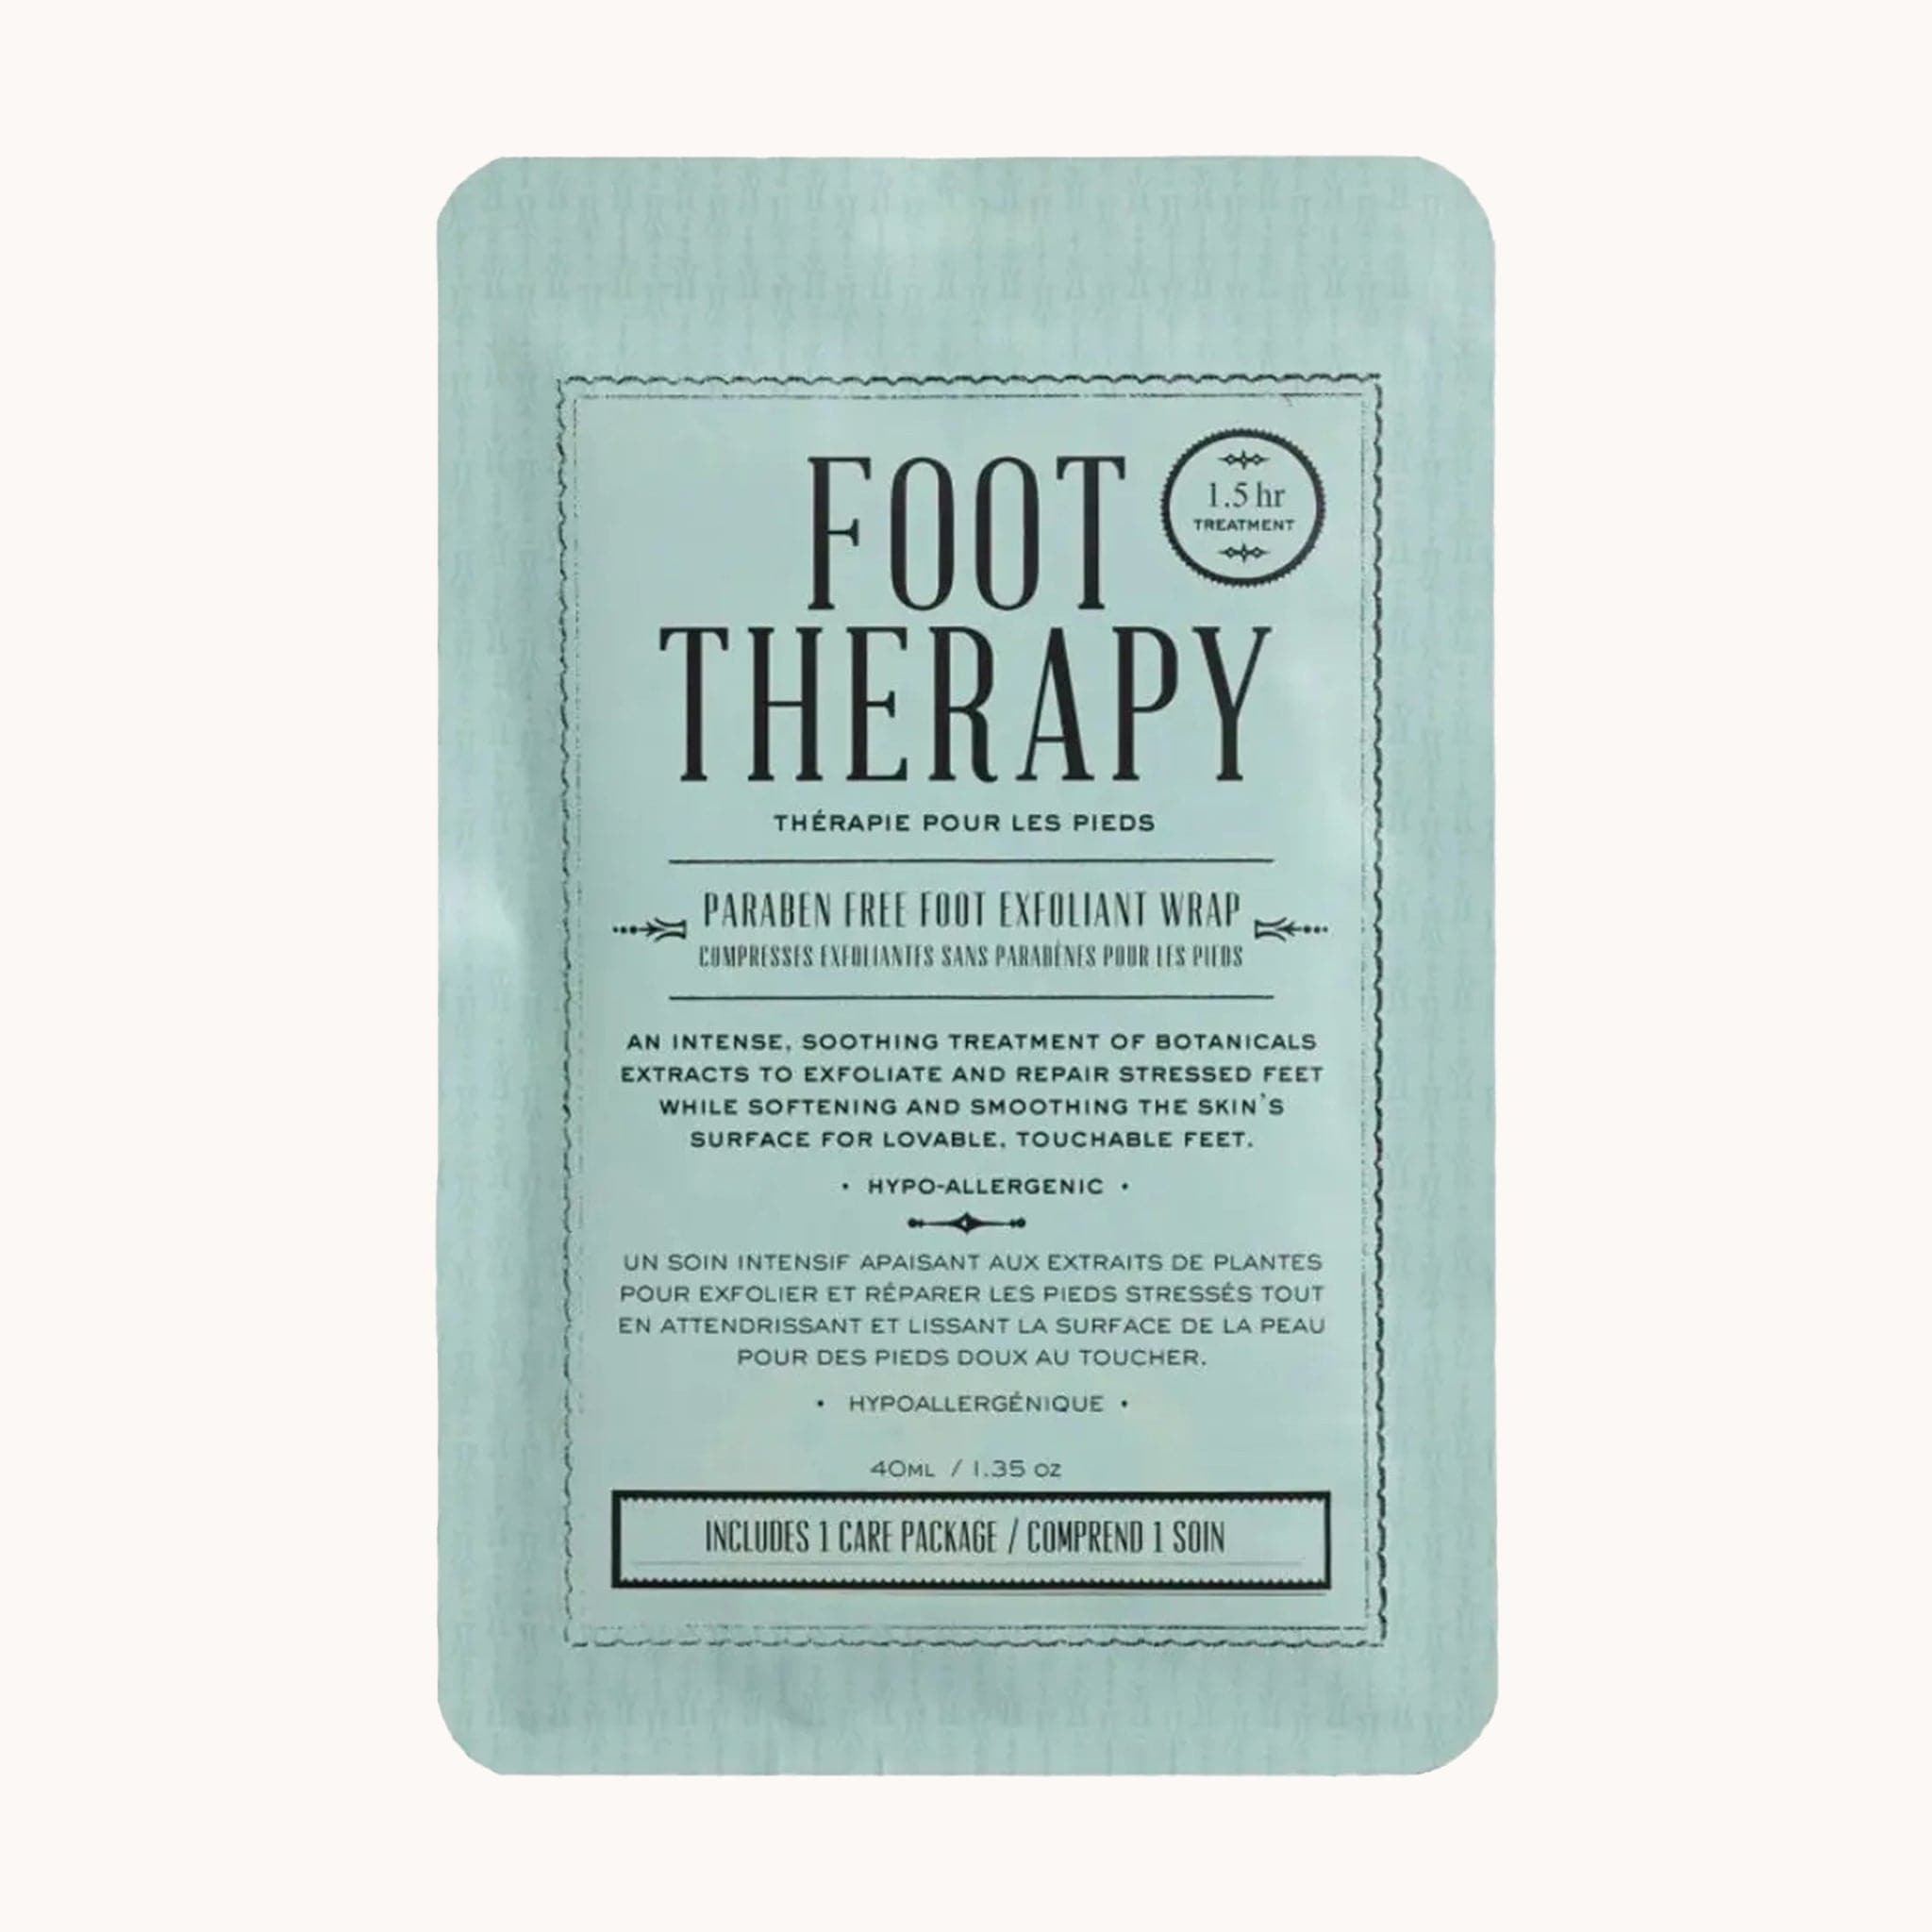 On a white background is a light blue packet with a foot mask inside along with text on the front that reads, "Foot Therapy".